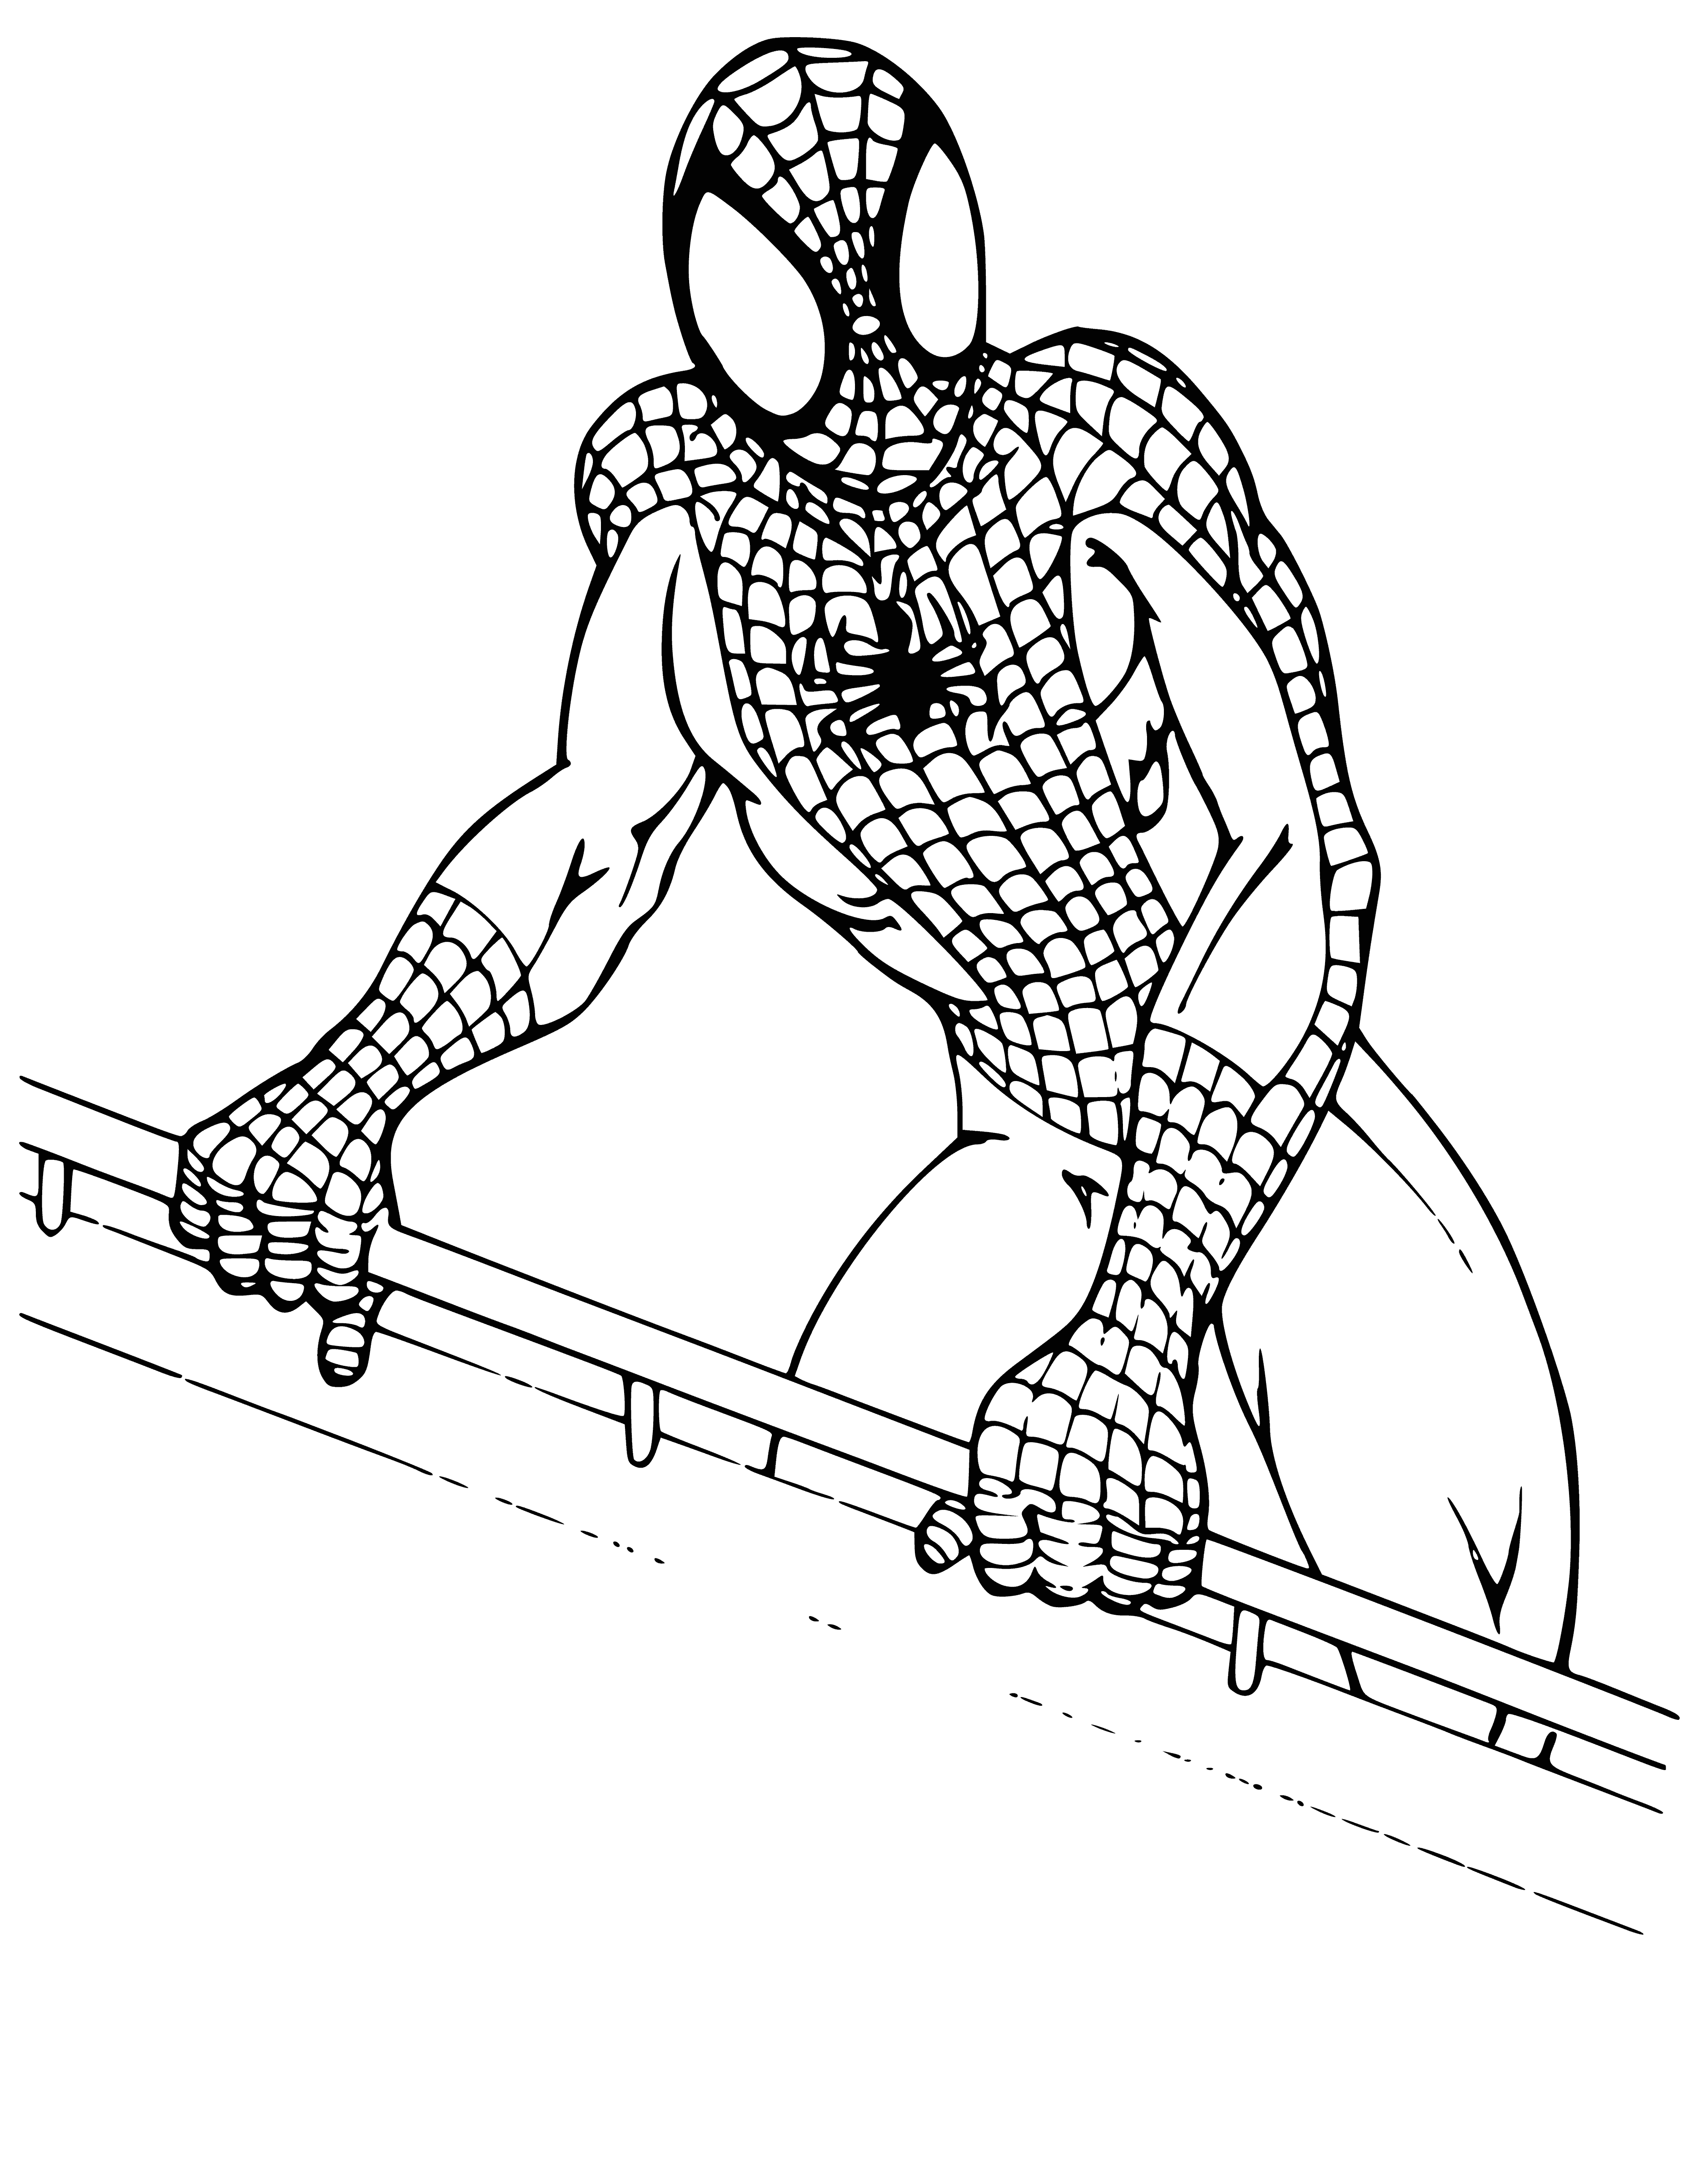 coloring page: Superhero Spiderman fights crime in red and blue costume with spider symbol, black mask, gloves and boots.